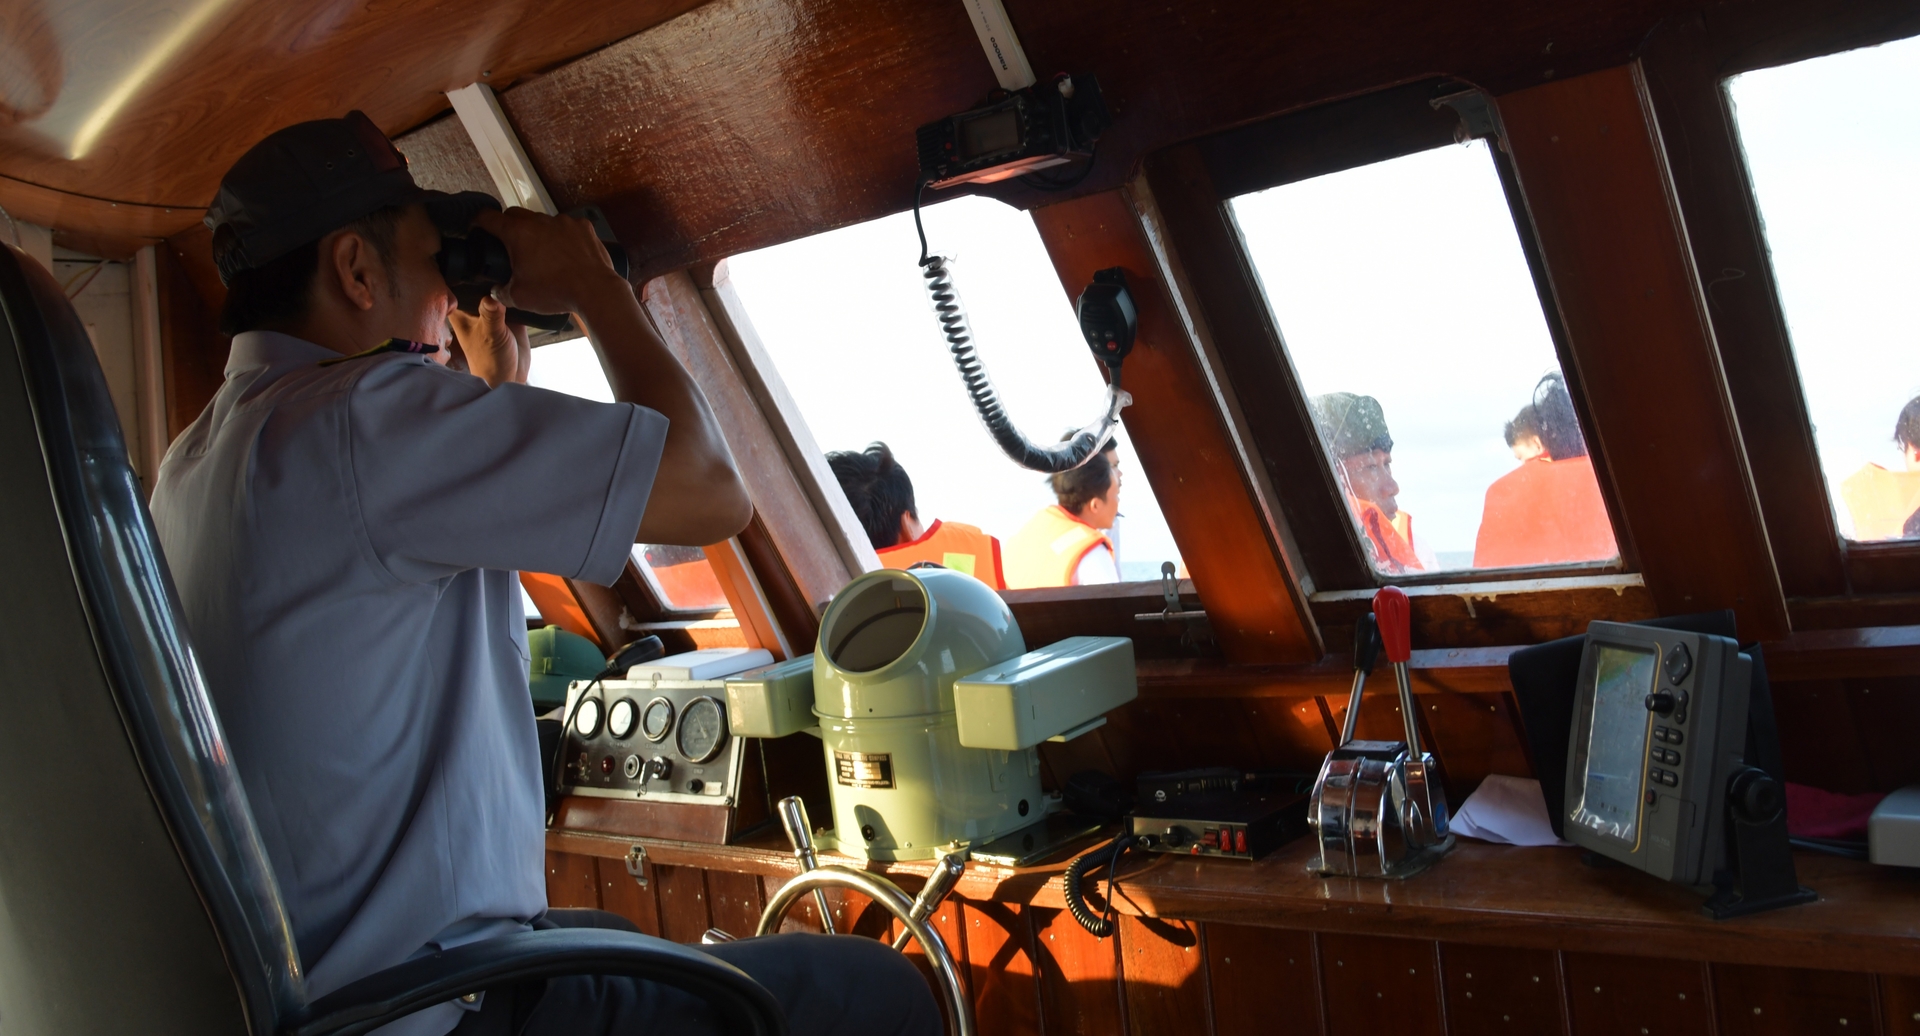 During future patrols, inspections, and control trips at sea, it is necessary to focus on fishing vessels at high risk of violating IUU fishing; vessels violating regulations on maintaining connection to the VMS system. Photo: Thanh Cuong.